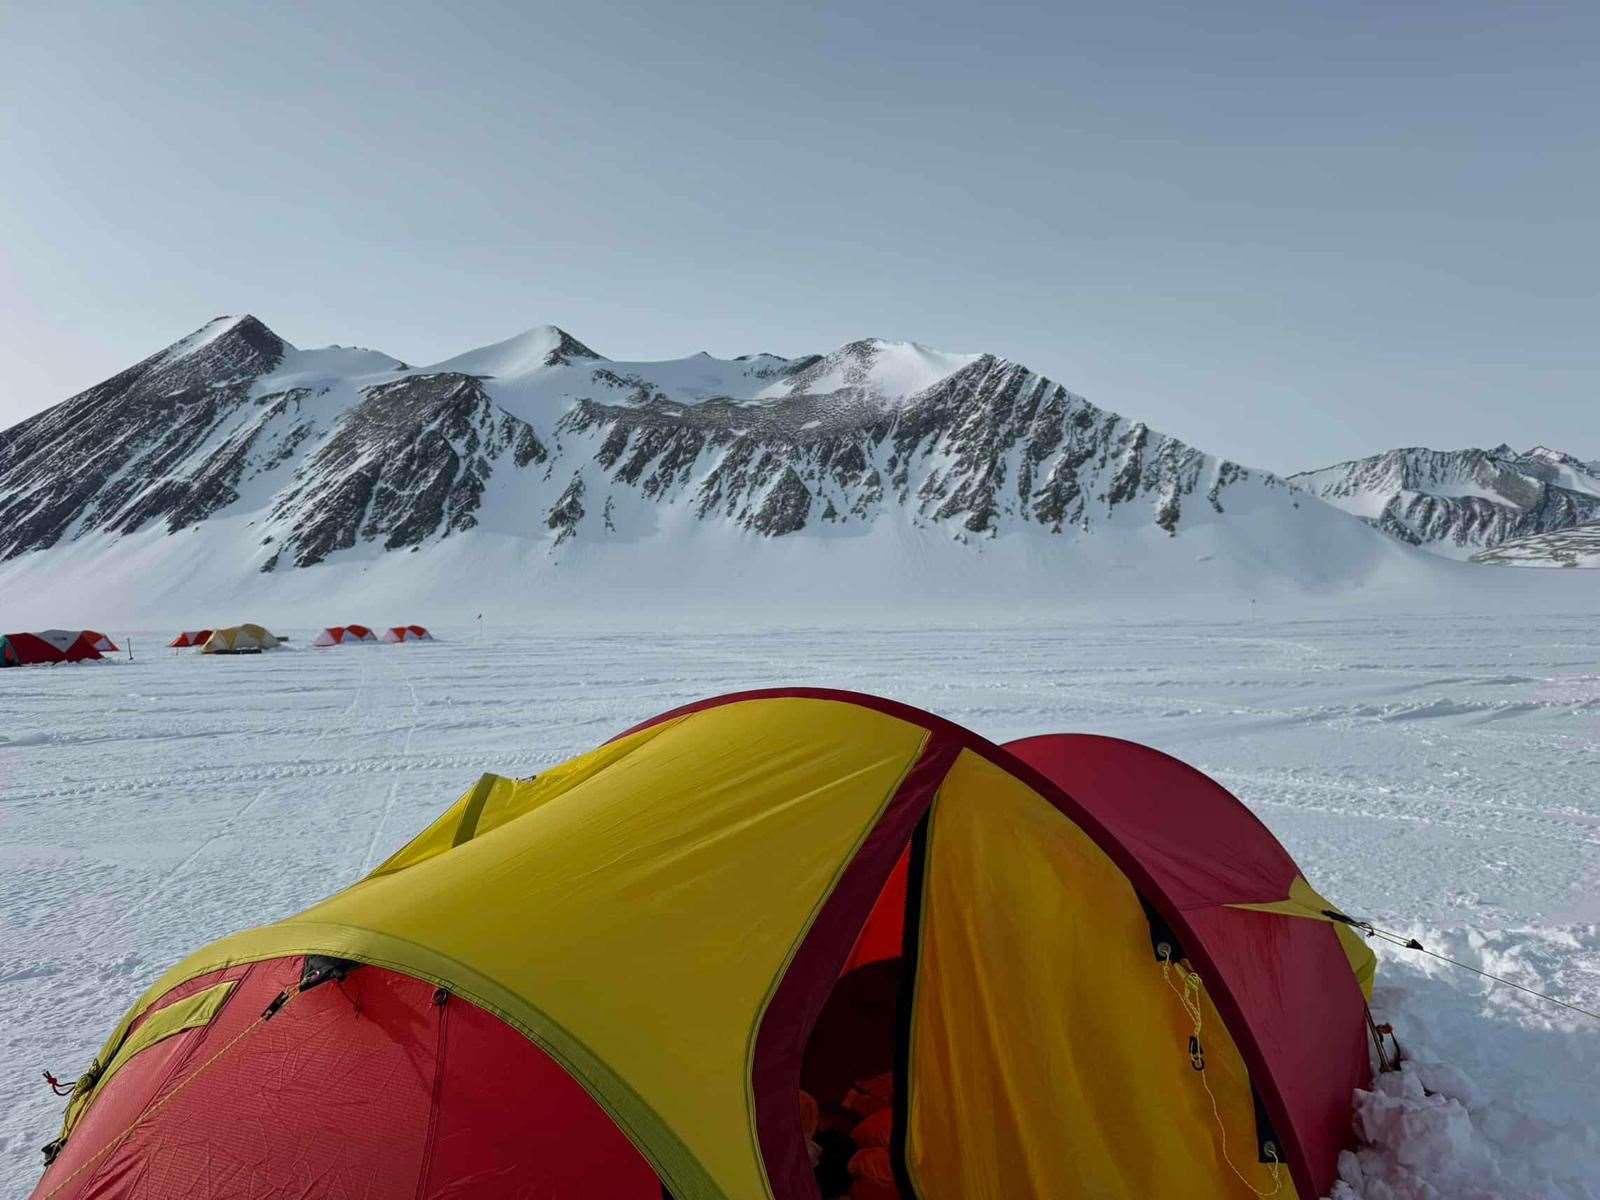 Mr Cox’s tent pitched in Antarctica after he arrived there this week (Sam Cox/PA)